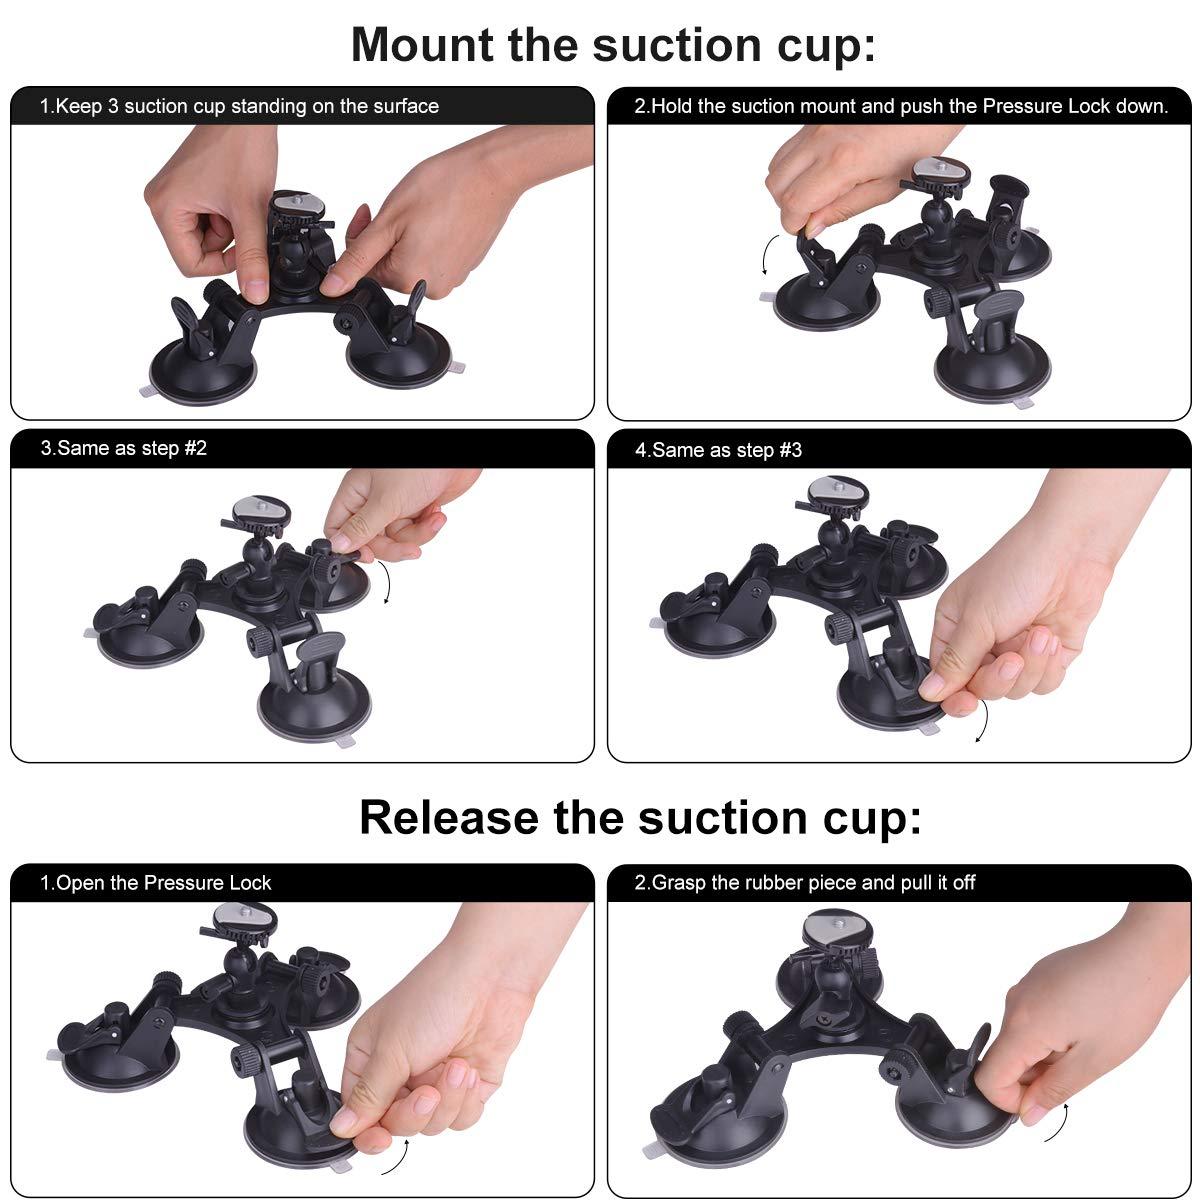 Action Camera Bracket Car Mount Suction Cup Windshield For GoPro Hero|DJI  OSMO